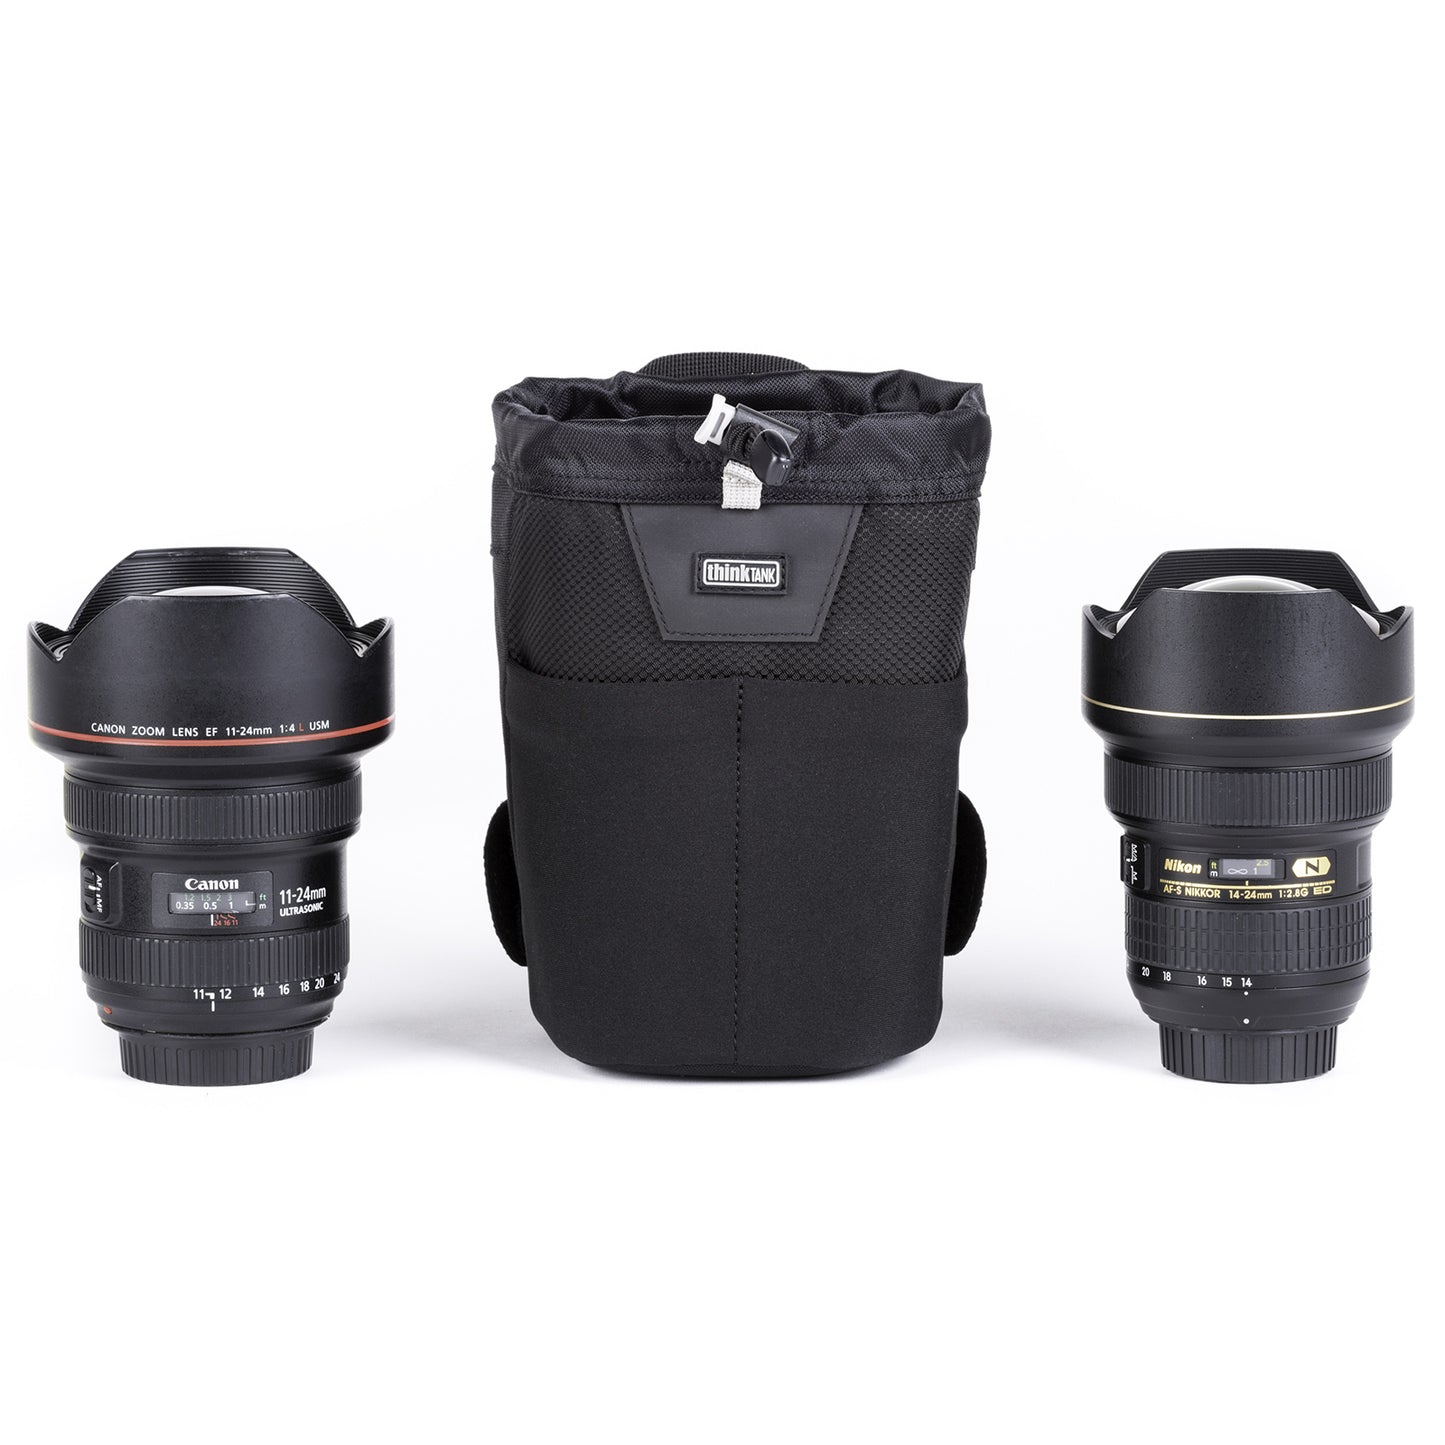 
                  
                    Fits wide-angle lenses with hoods in shooting position. Like 16–35mm f/2.8 or 11–24mm f/4 or 24mm f/1.4 or 14–24mm f/2.8 each with the lens hood in the shooting position
                  
                